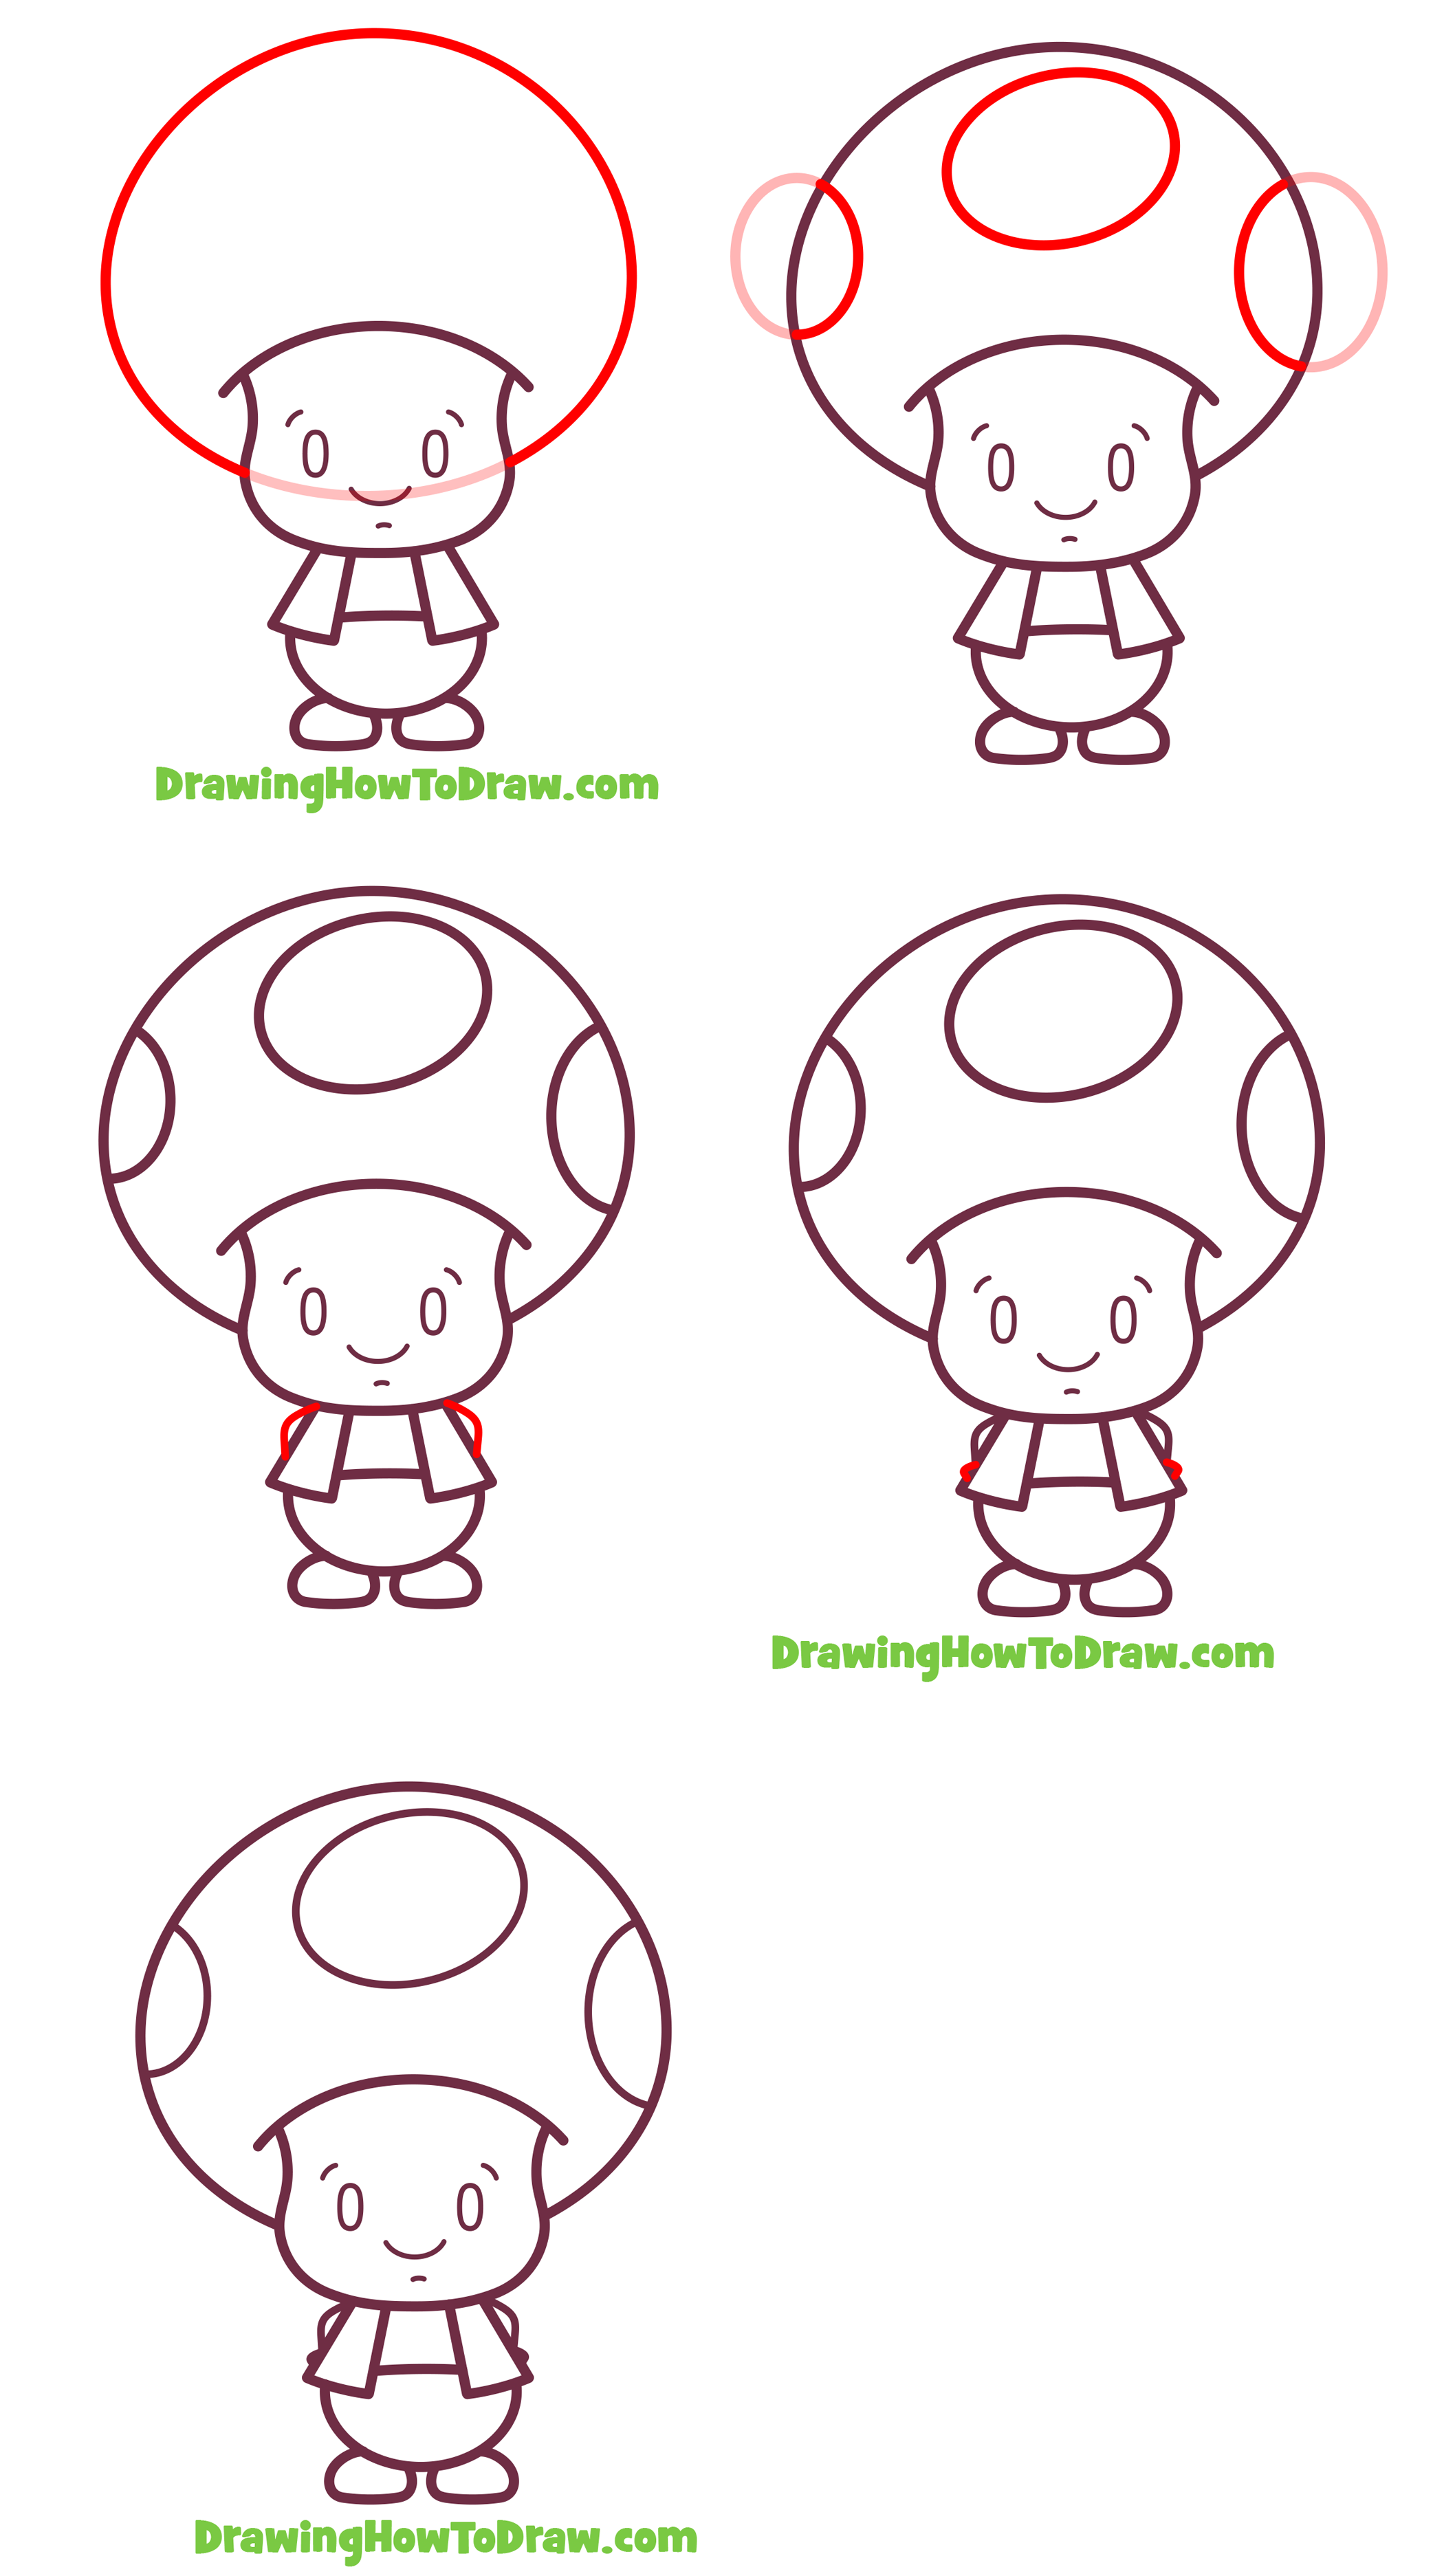 Learn How to Draw Toad from Super Mario Bros (Cute / Kawaii / Chibi Style) Easy Step-by-Step Drawing Tutorial for Kids